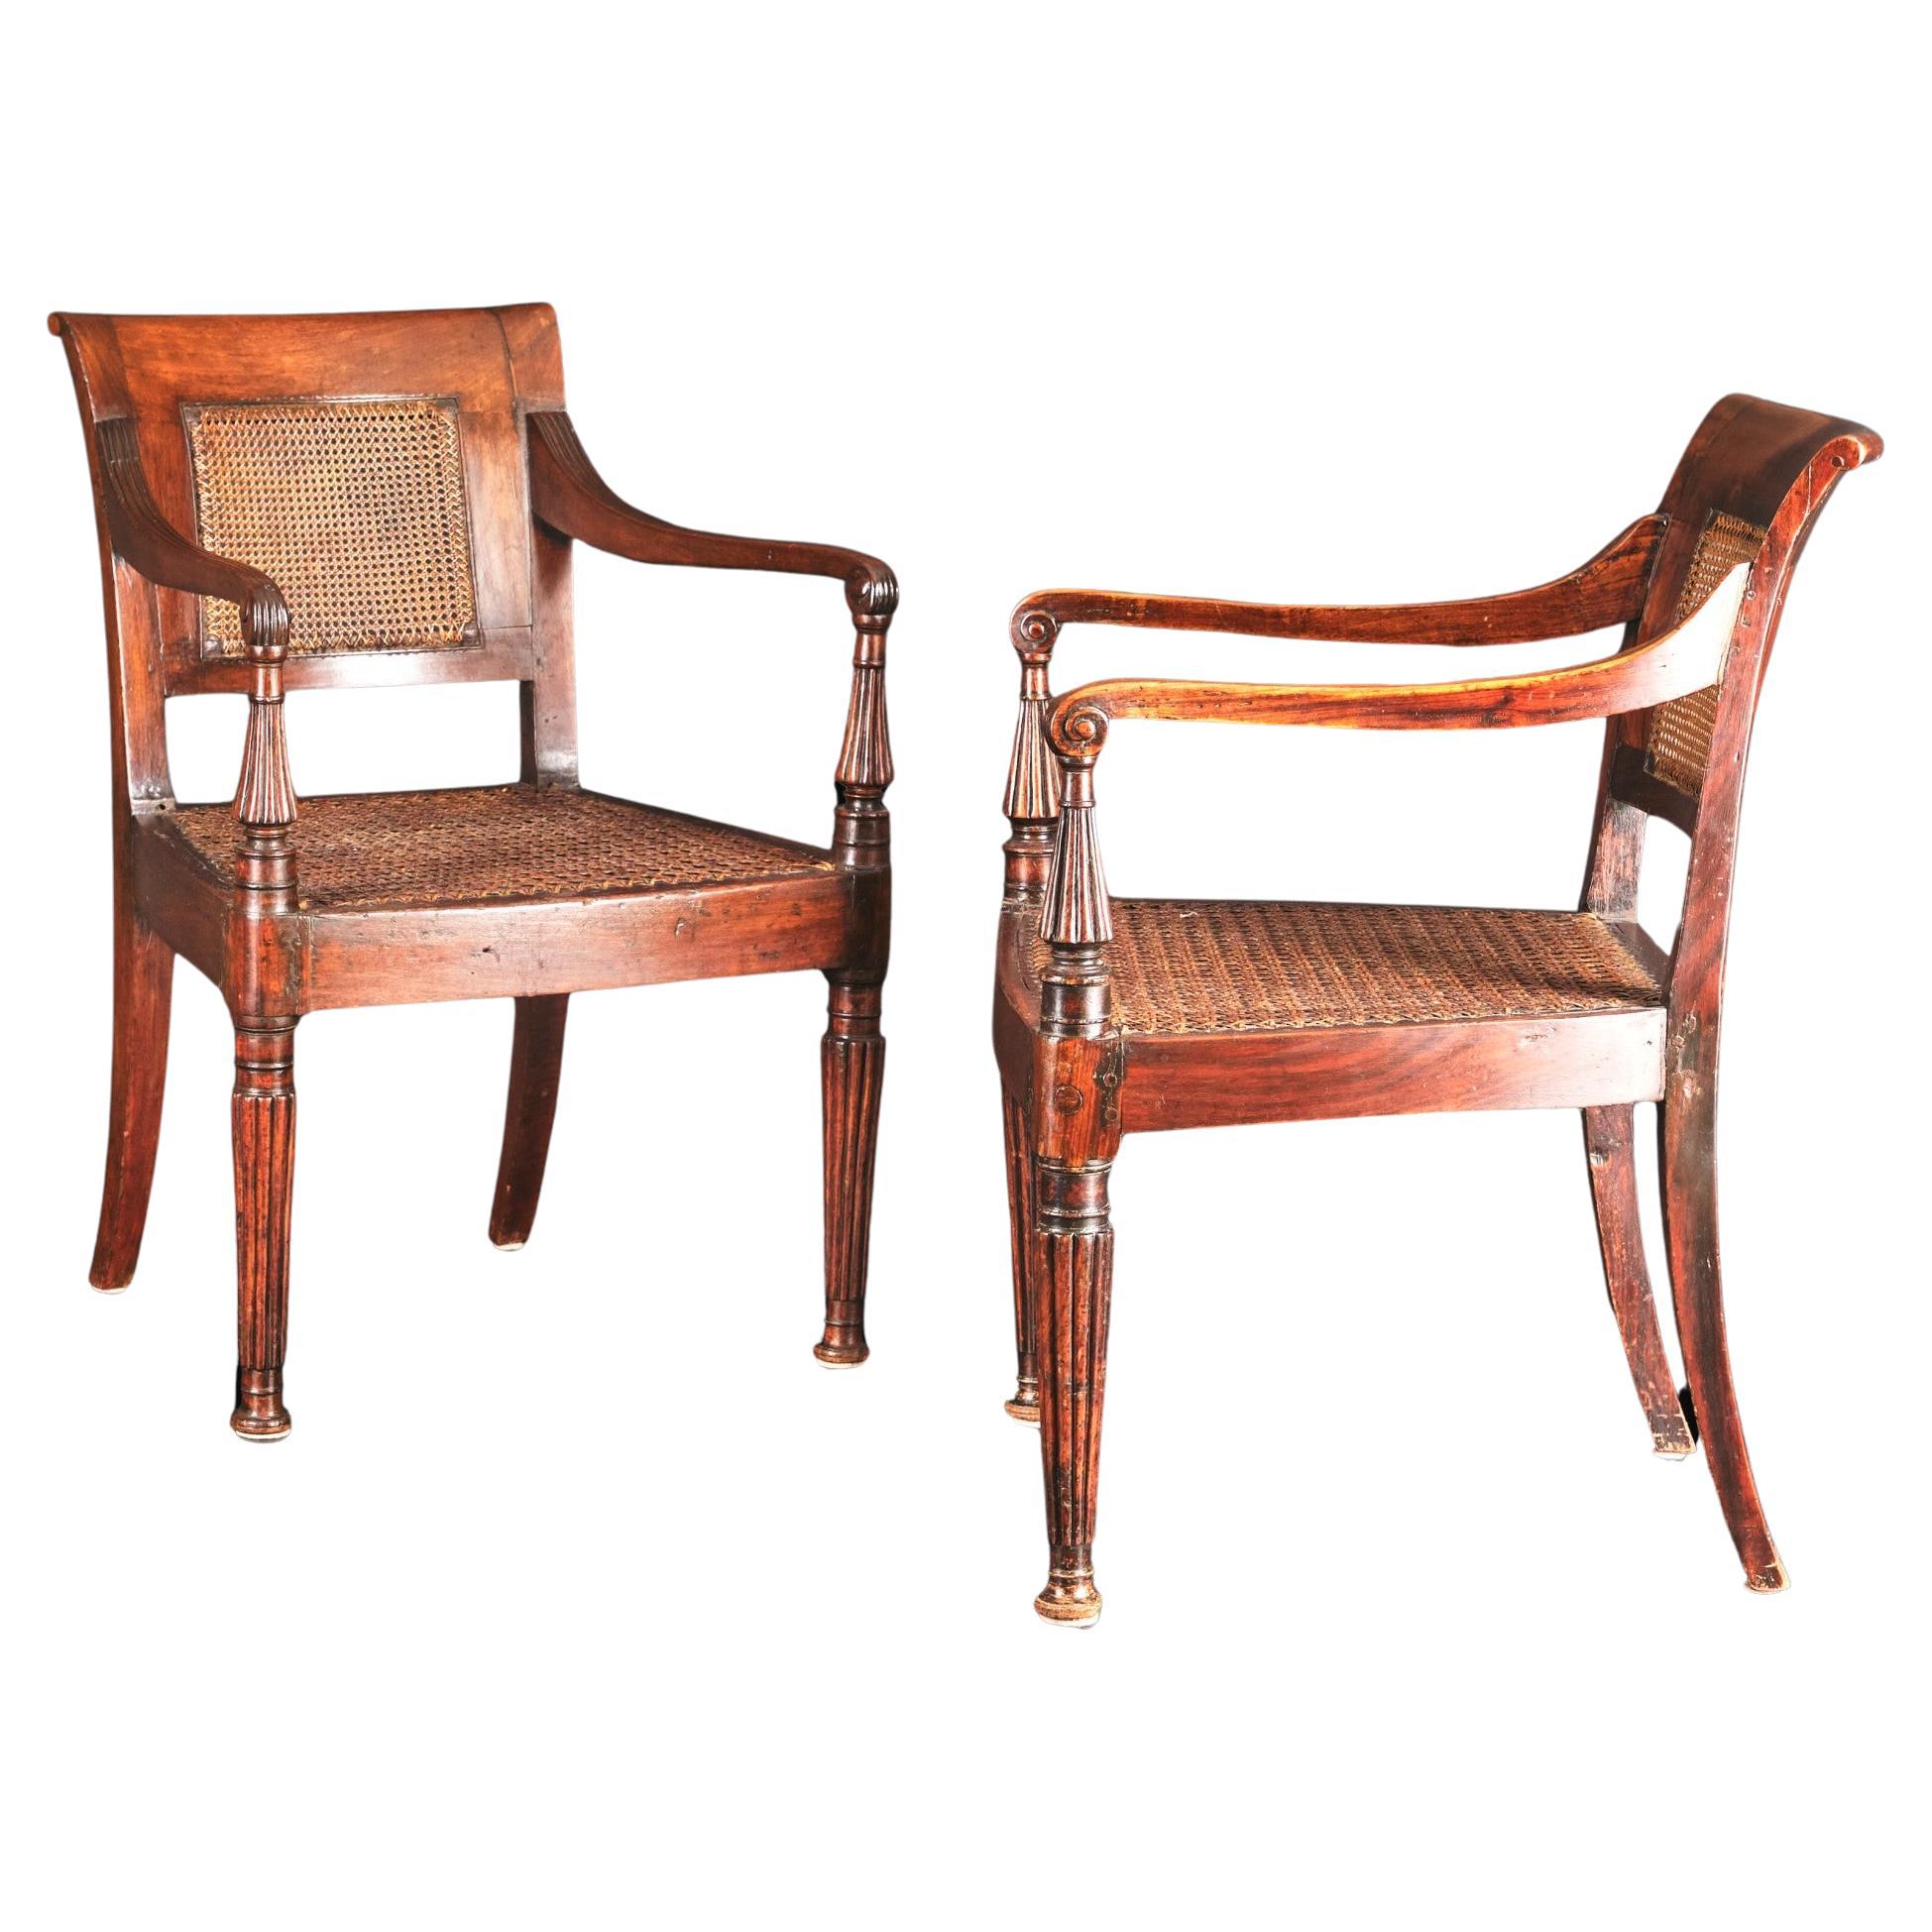 A Handsome Pair of 19th Century Anglo-Indian Padouk Wood Armchairs, Circa 1830 For Sale